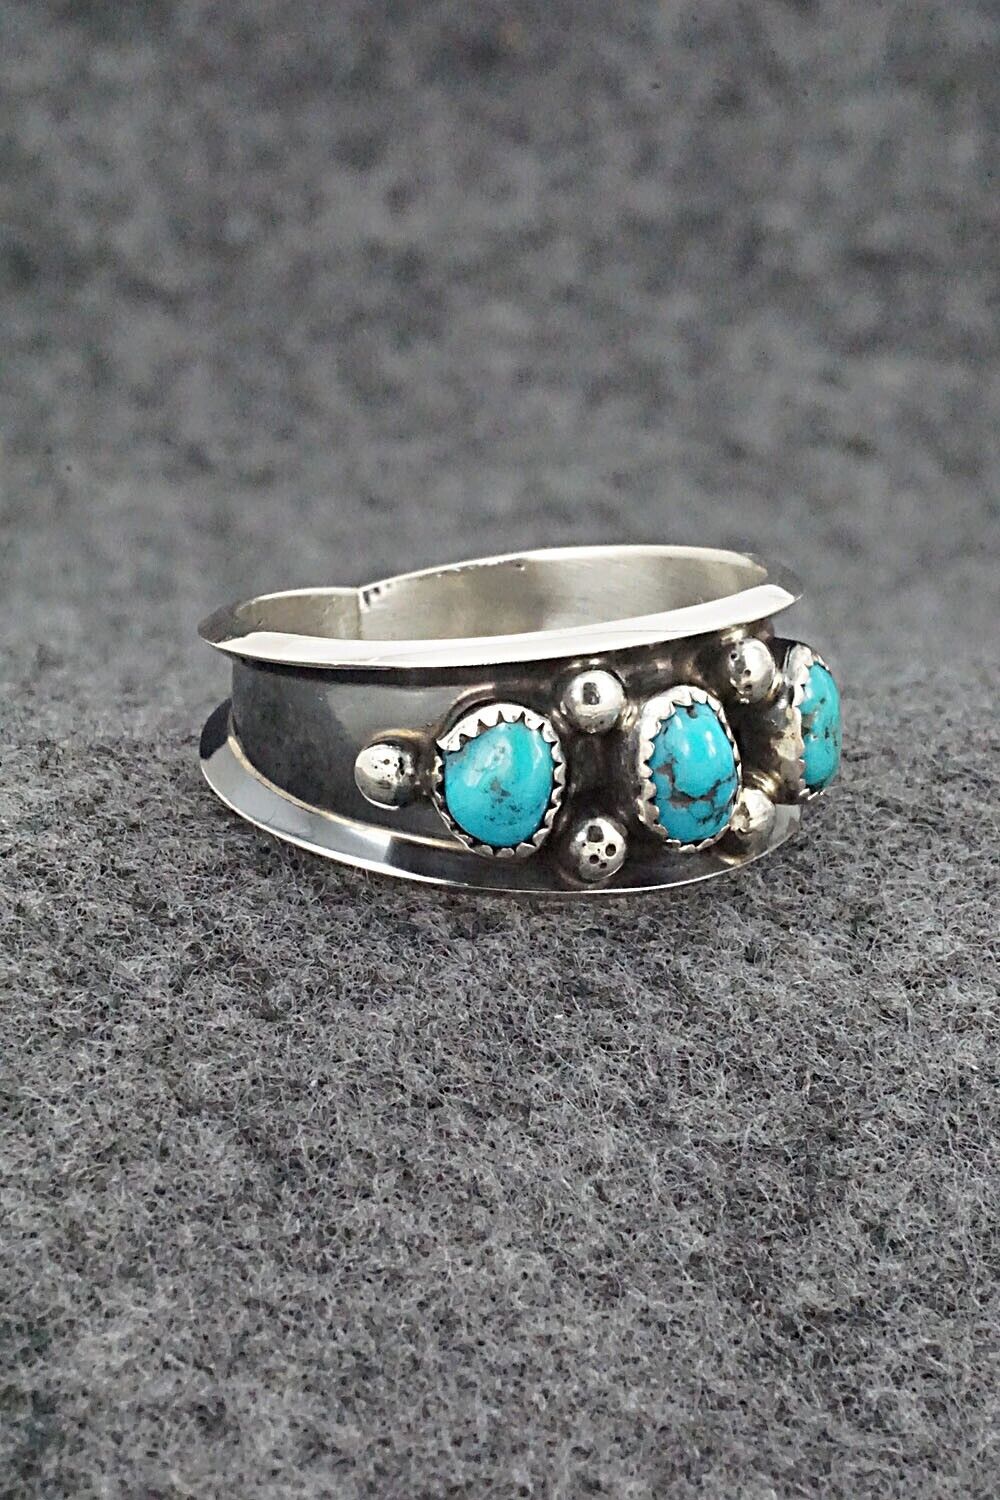 Turquoise & Sterling Silver Ring - Paul Largo - Size 12.5 – High